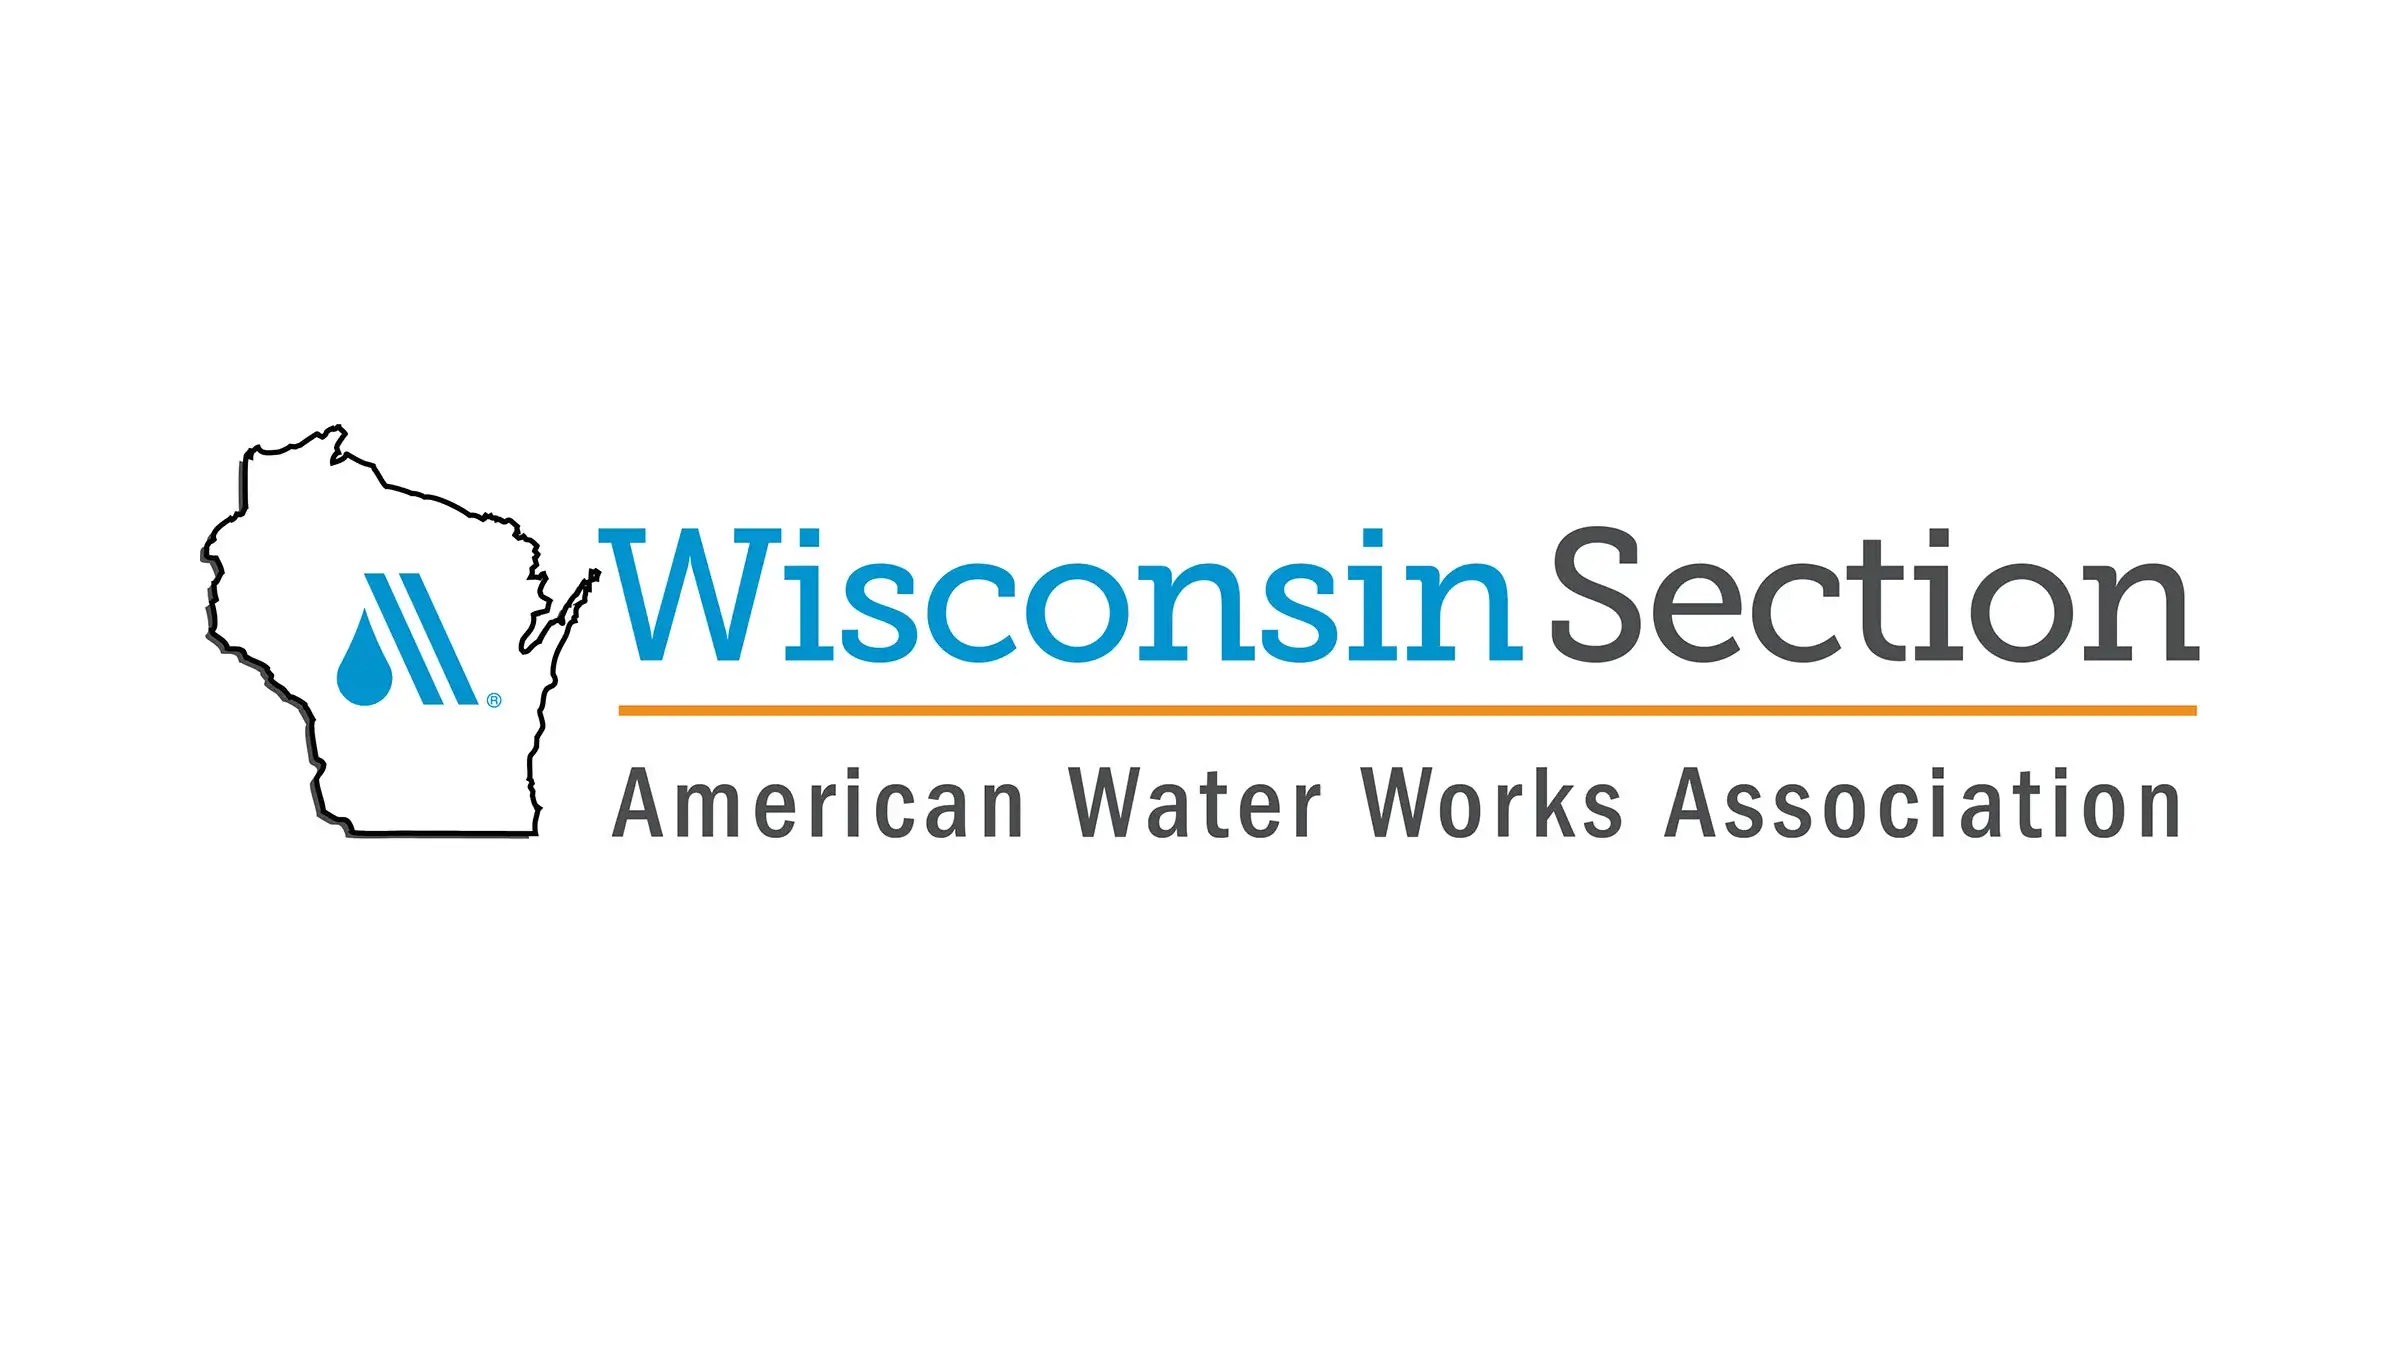 Wisconsin Section American Water Works Association logo